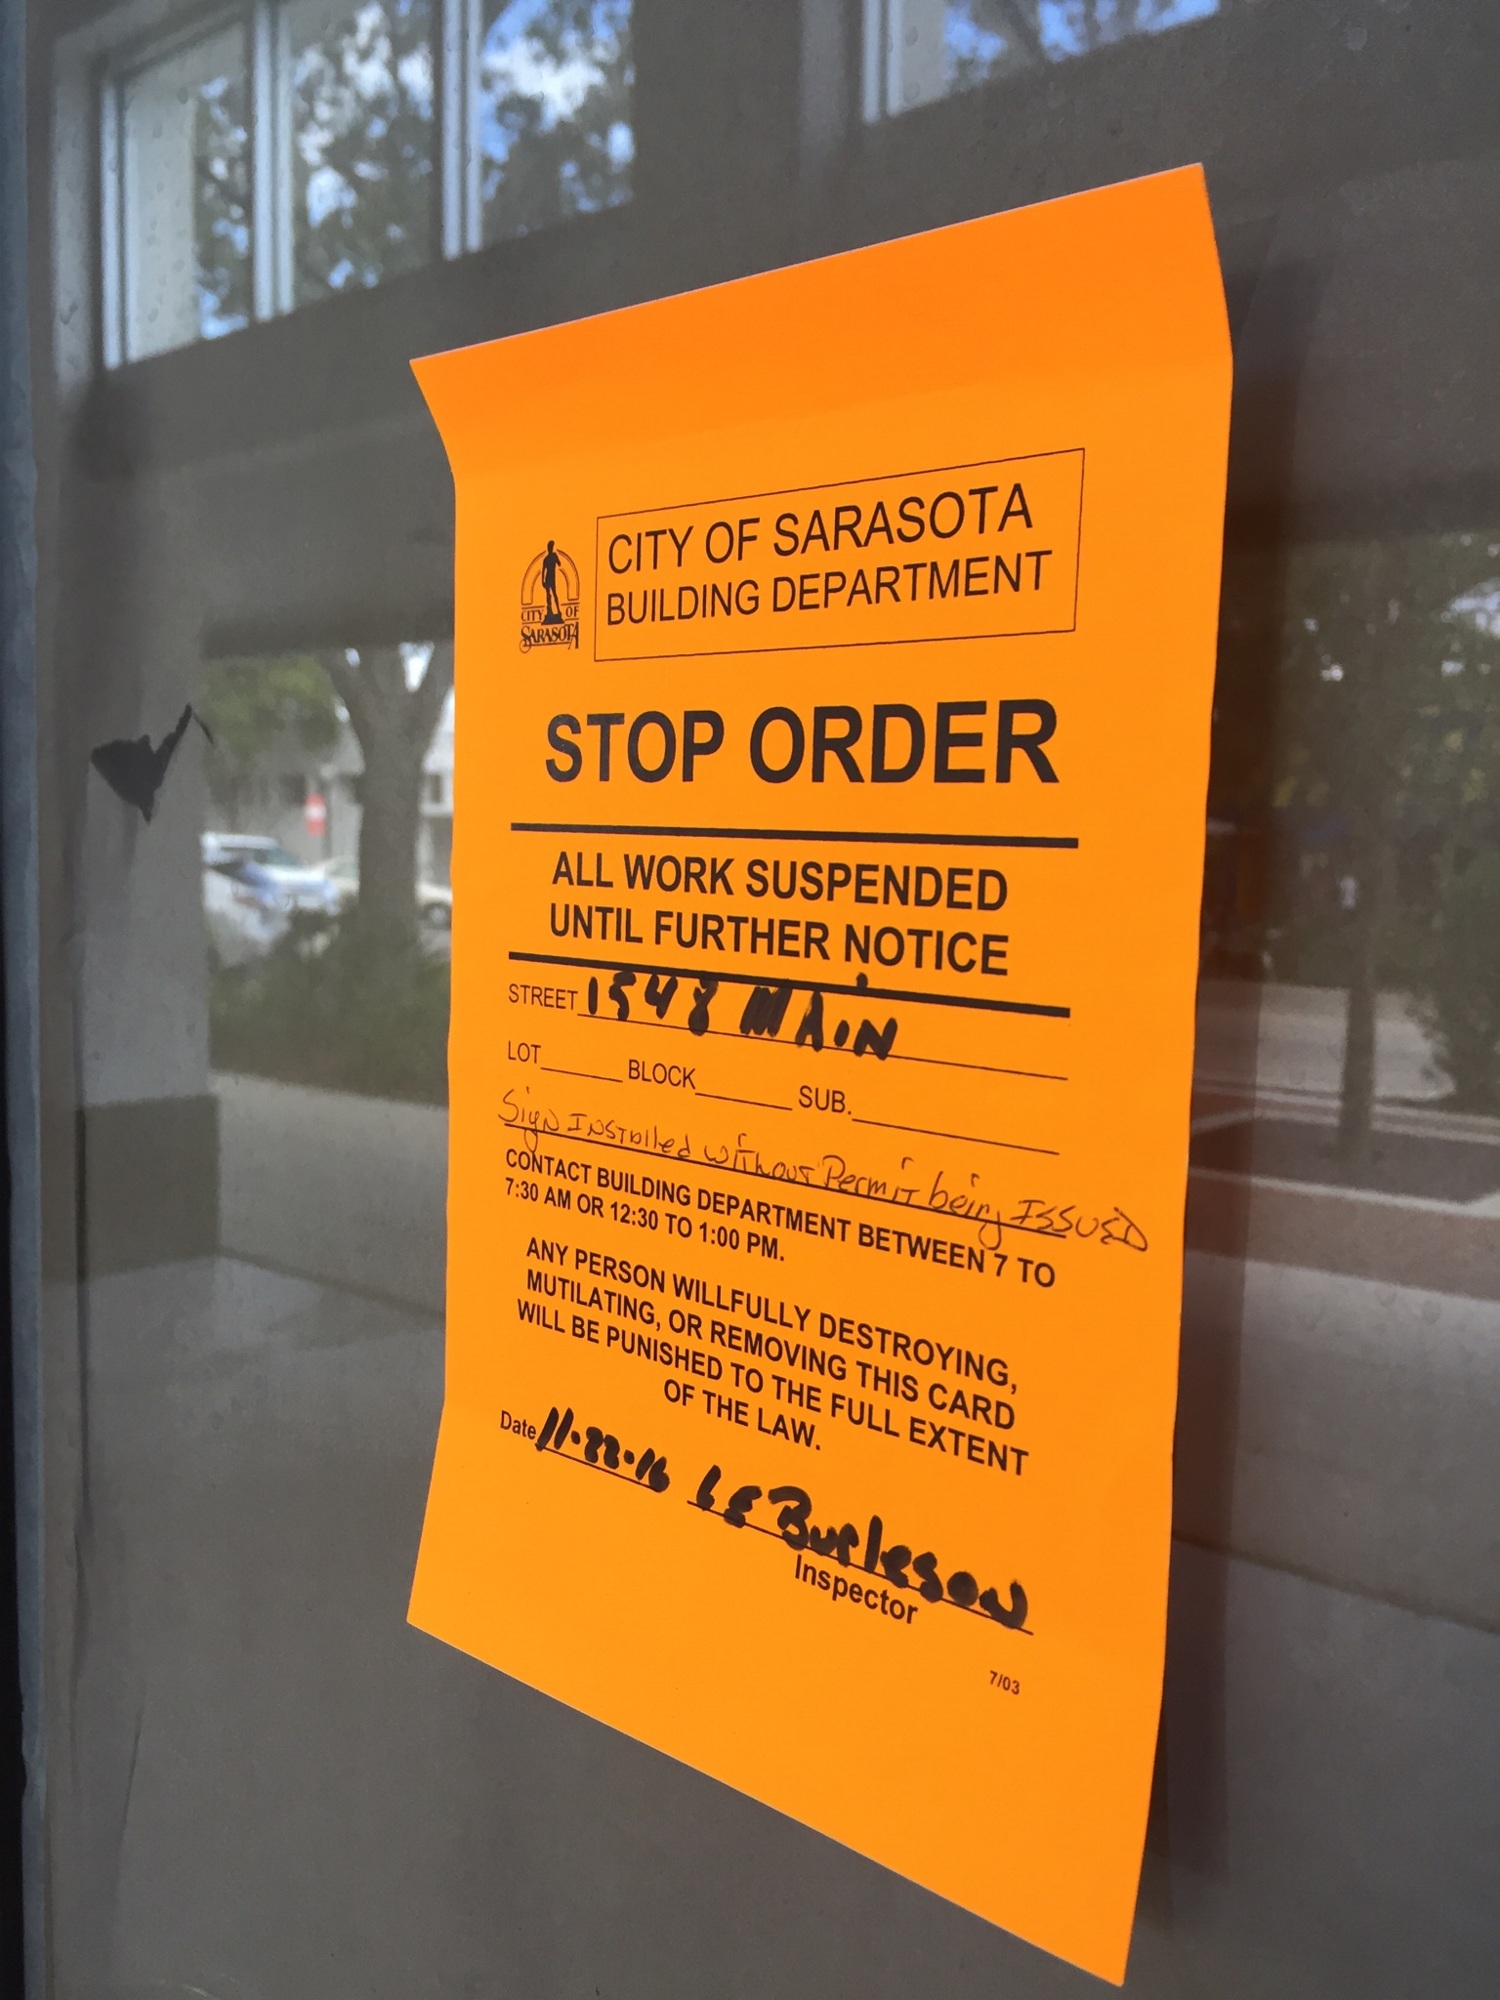 The stop-work order is posted on the door of the property at 1548 Main St.